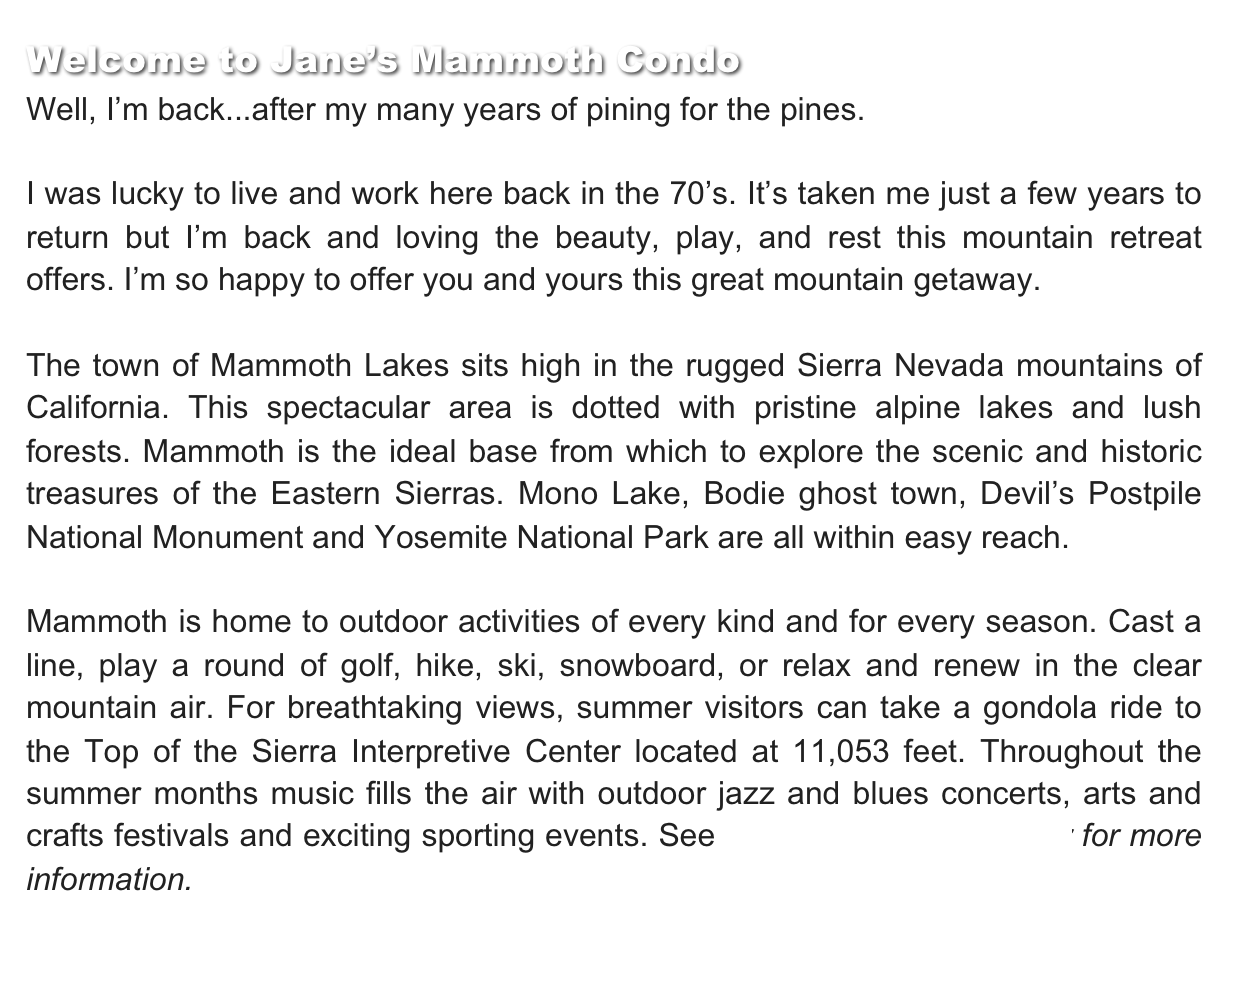 Welcome to Jane’s Mammoth Condo
Well, I’m back...after my many years of pining for the pines.

I was lucky to live and work here back in the 70’s. It’s taken me just a few years to return but I’m back and loving the beauty, play, and rest this mountain retreat offers. I’m so happy to offer you and yours this great mountain getaway.

The town of Mammoth Lakes sits high in the rugged Sierra Nevada mountains of California. This spectacular area is dotted with pristine alpine lakes and lush forests. Mammoth is the ideal base from which to explore the scenic and historic treasures of the Eastern Sierras. Mono Lake, Bodie ghost town, Devil’s Postpile National Monument and Yosemite National Park are all within easy reach.

Mammoth is home to outdoor activities of every kind and for every season. Cast a line, play a round of golf, hike, ski, snowboard, or relax and renew in the clear mountain air. For breathtaking views, summer visitors can take a gondola ride to the Top of the Sierra Interpretive Center located at 11,053 feet. Throughout the summer months music fills the air with outdoor jazz and blues concerts, arts and crafts festivals and exciting sporting events. See Local Links & Weather for more information.